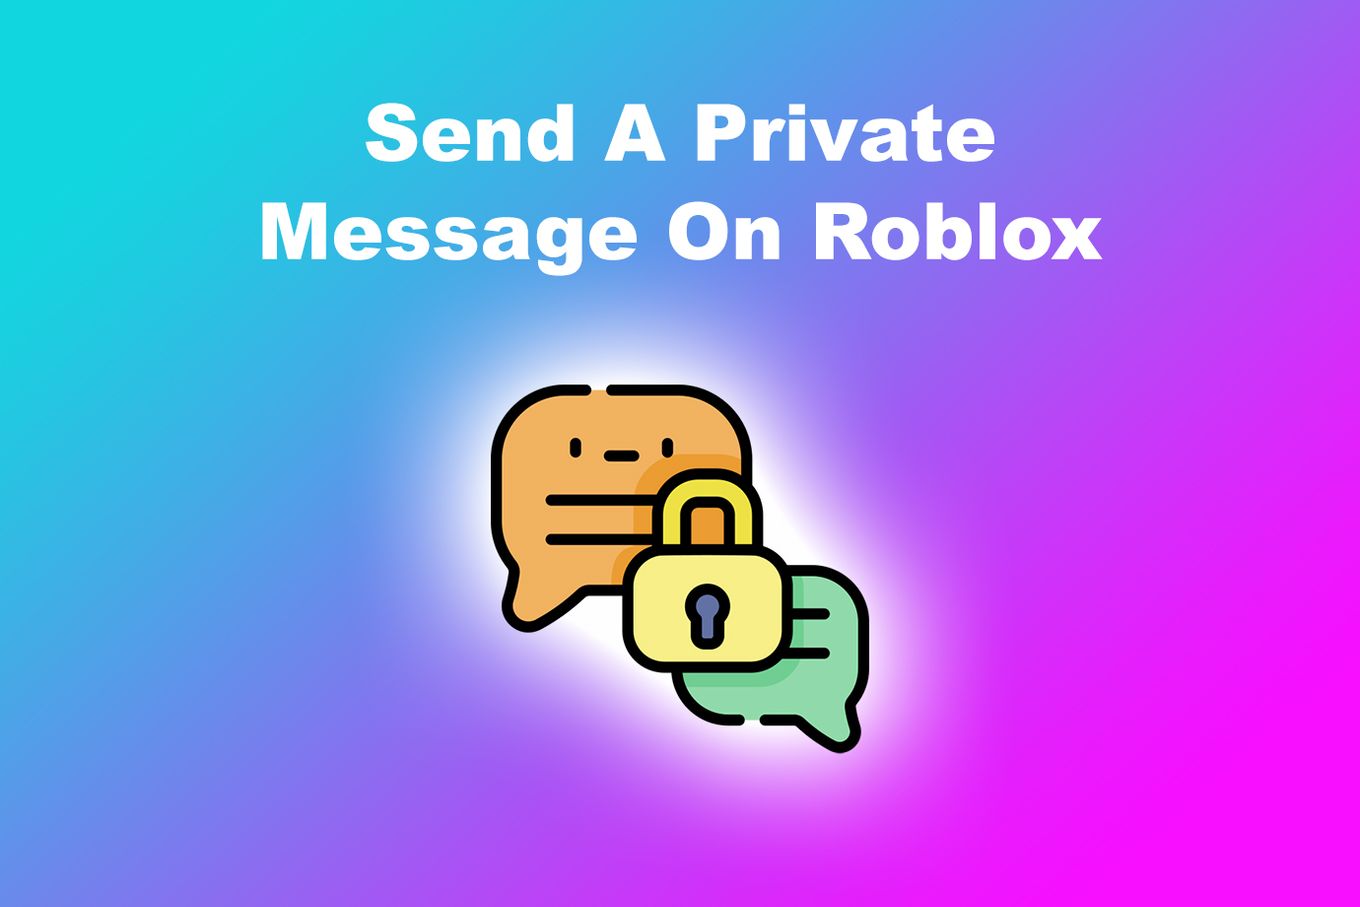 Send a private message on Roblox